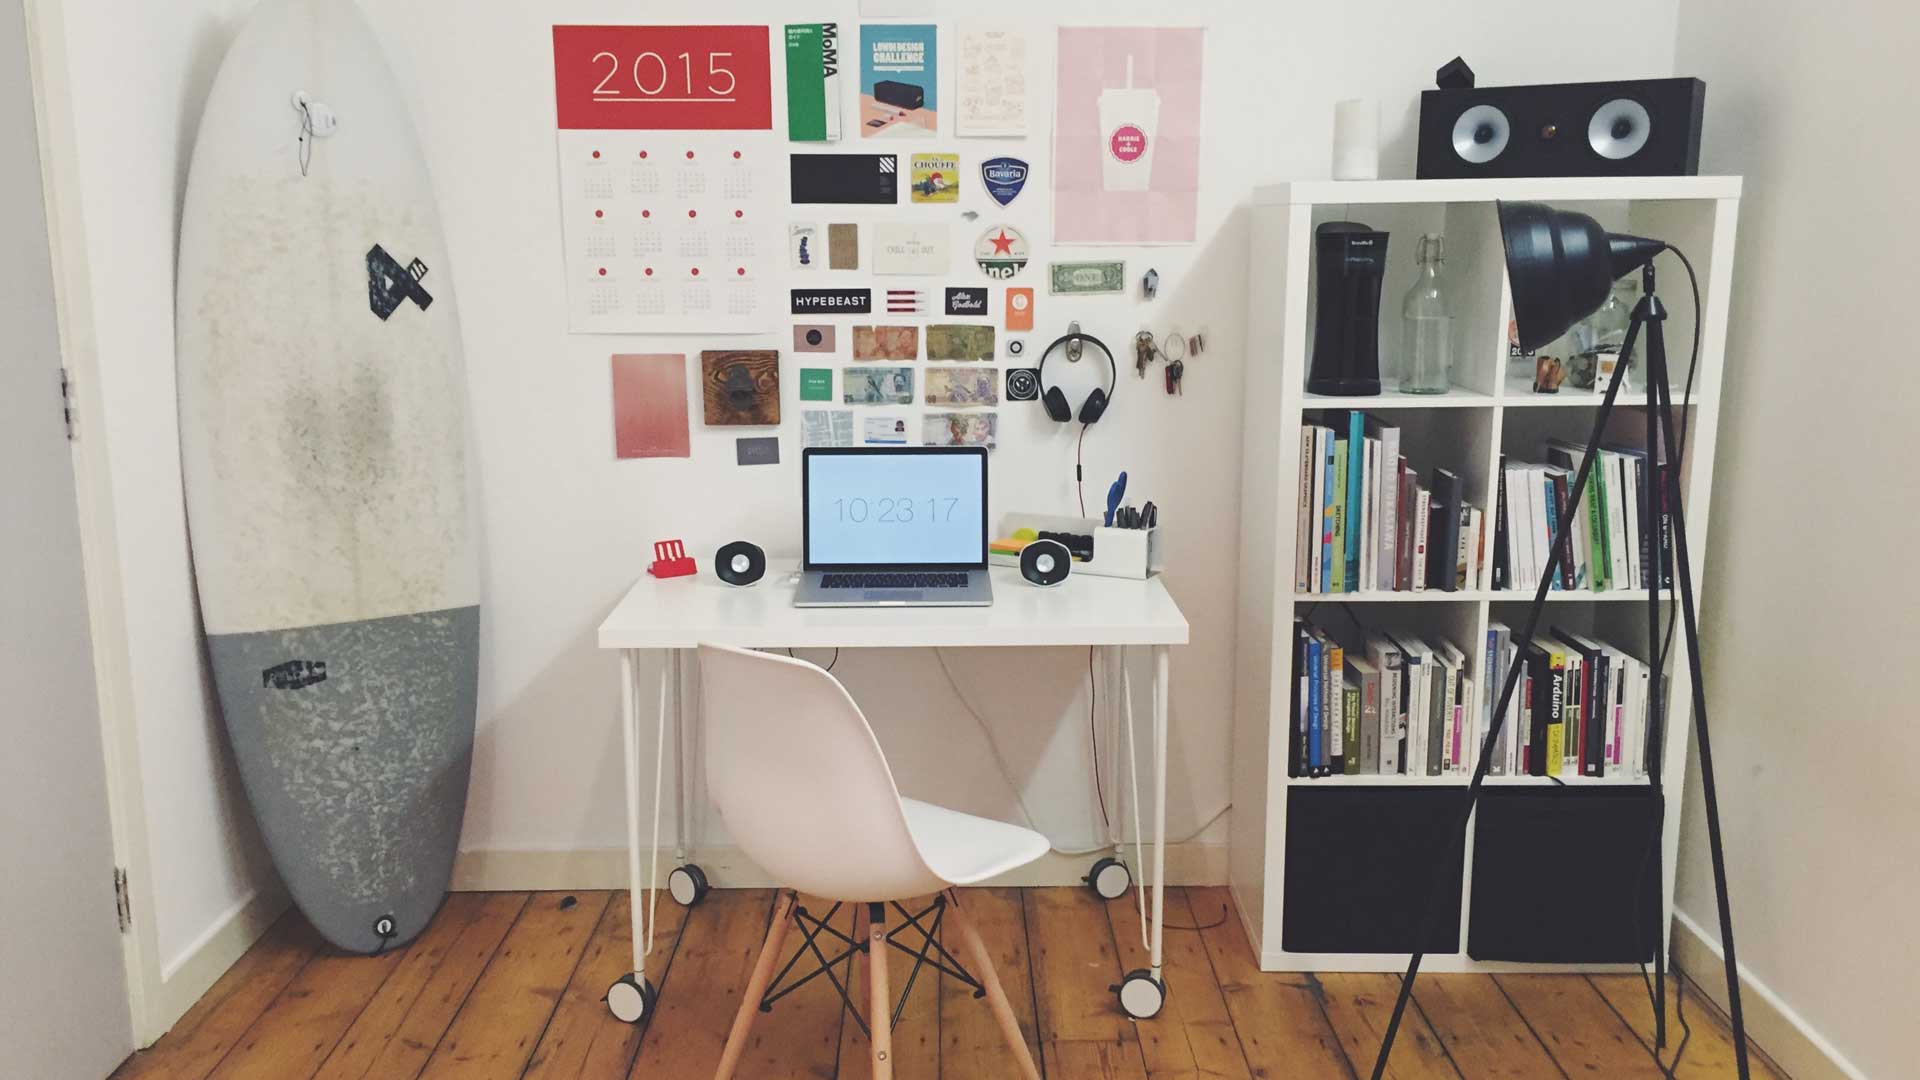 How To Keep Your Desk Organized In Some Simple Ways